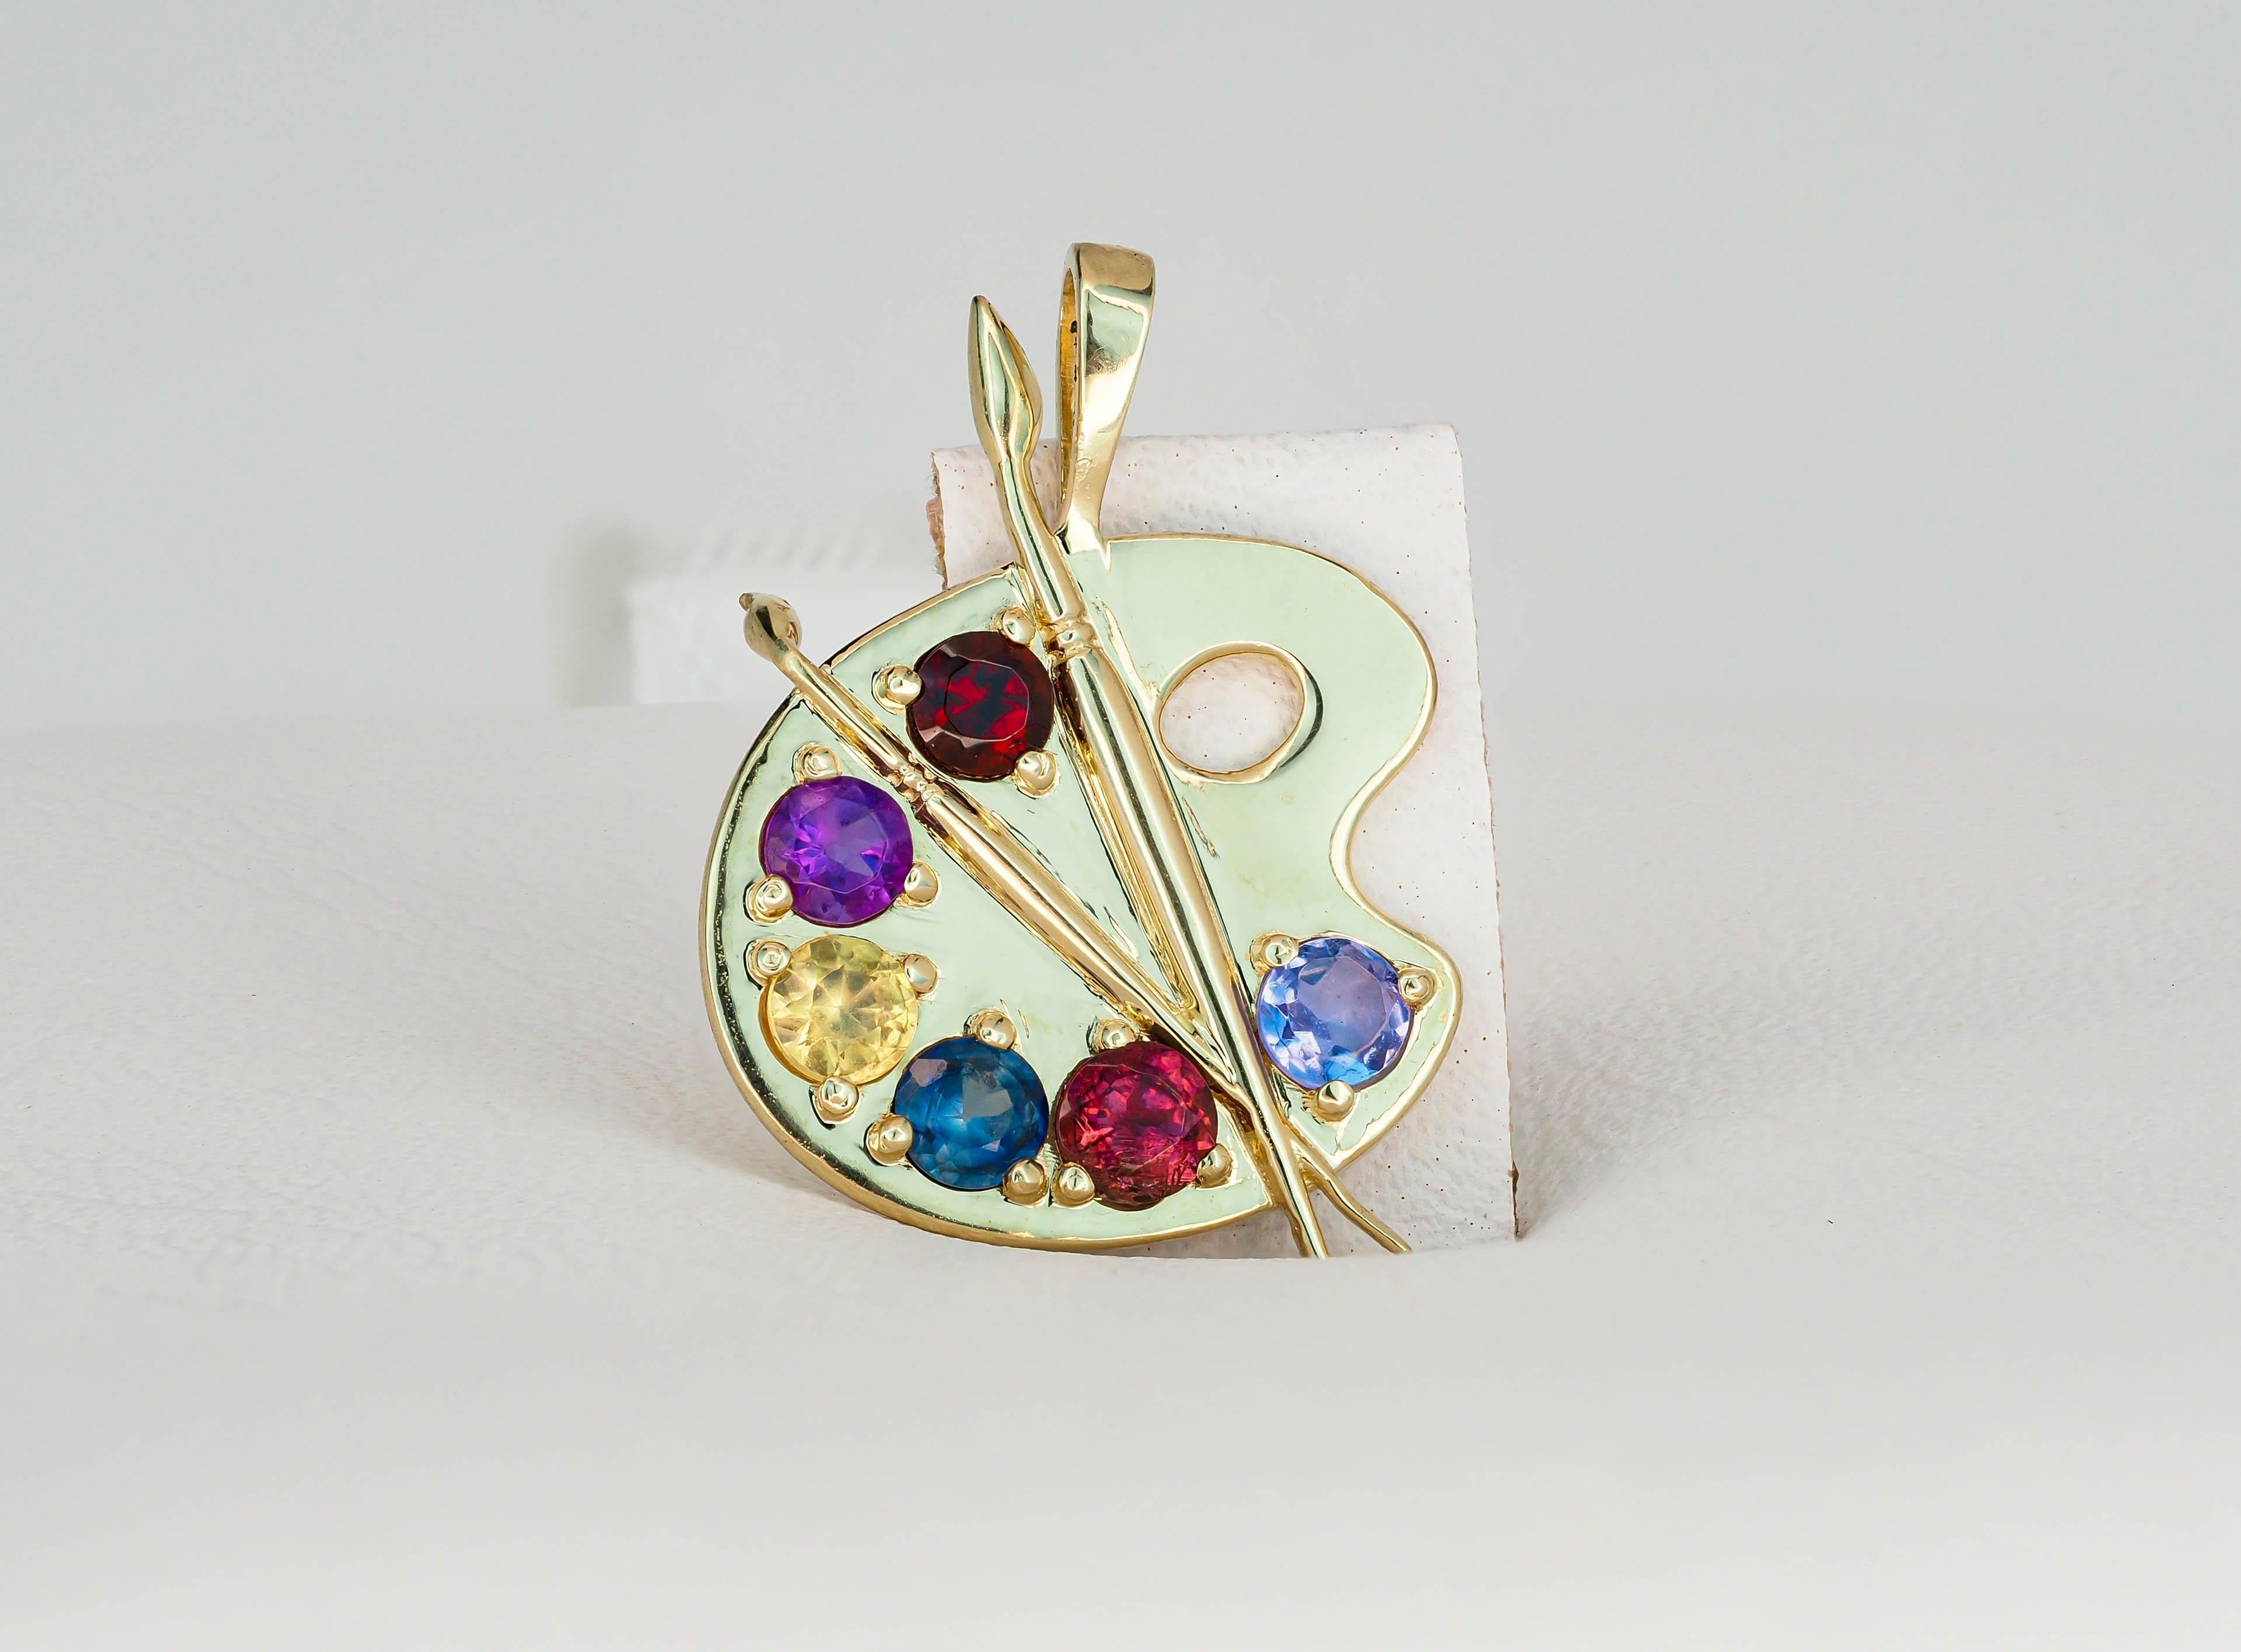 Palette with paints 14 kt solid gold pendant with colored stones. Artist palette pendant in 14k gold. Multicolored gemstones pendant. Paint Palette pendant. 

14 kt solid yellow gold
Size: 17.6 x 18 mm.
Total weight 1.61 g.

Natural